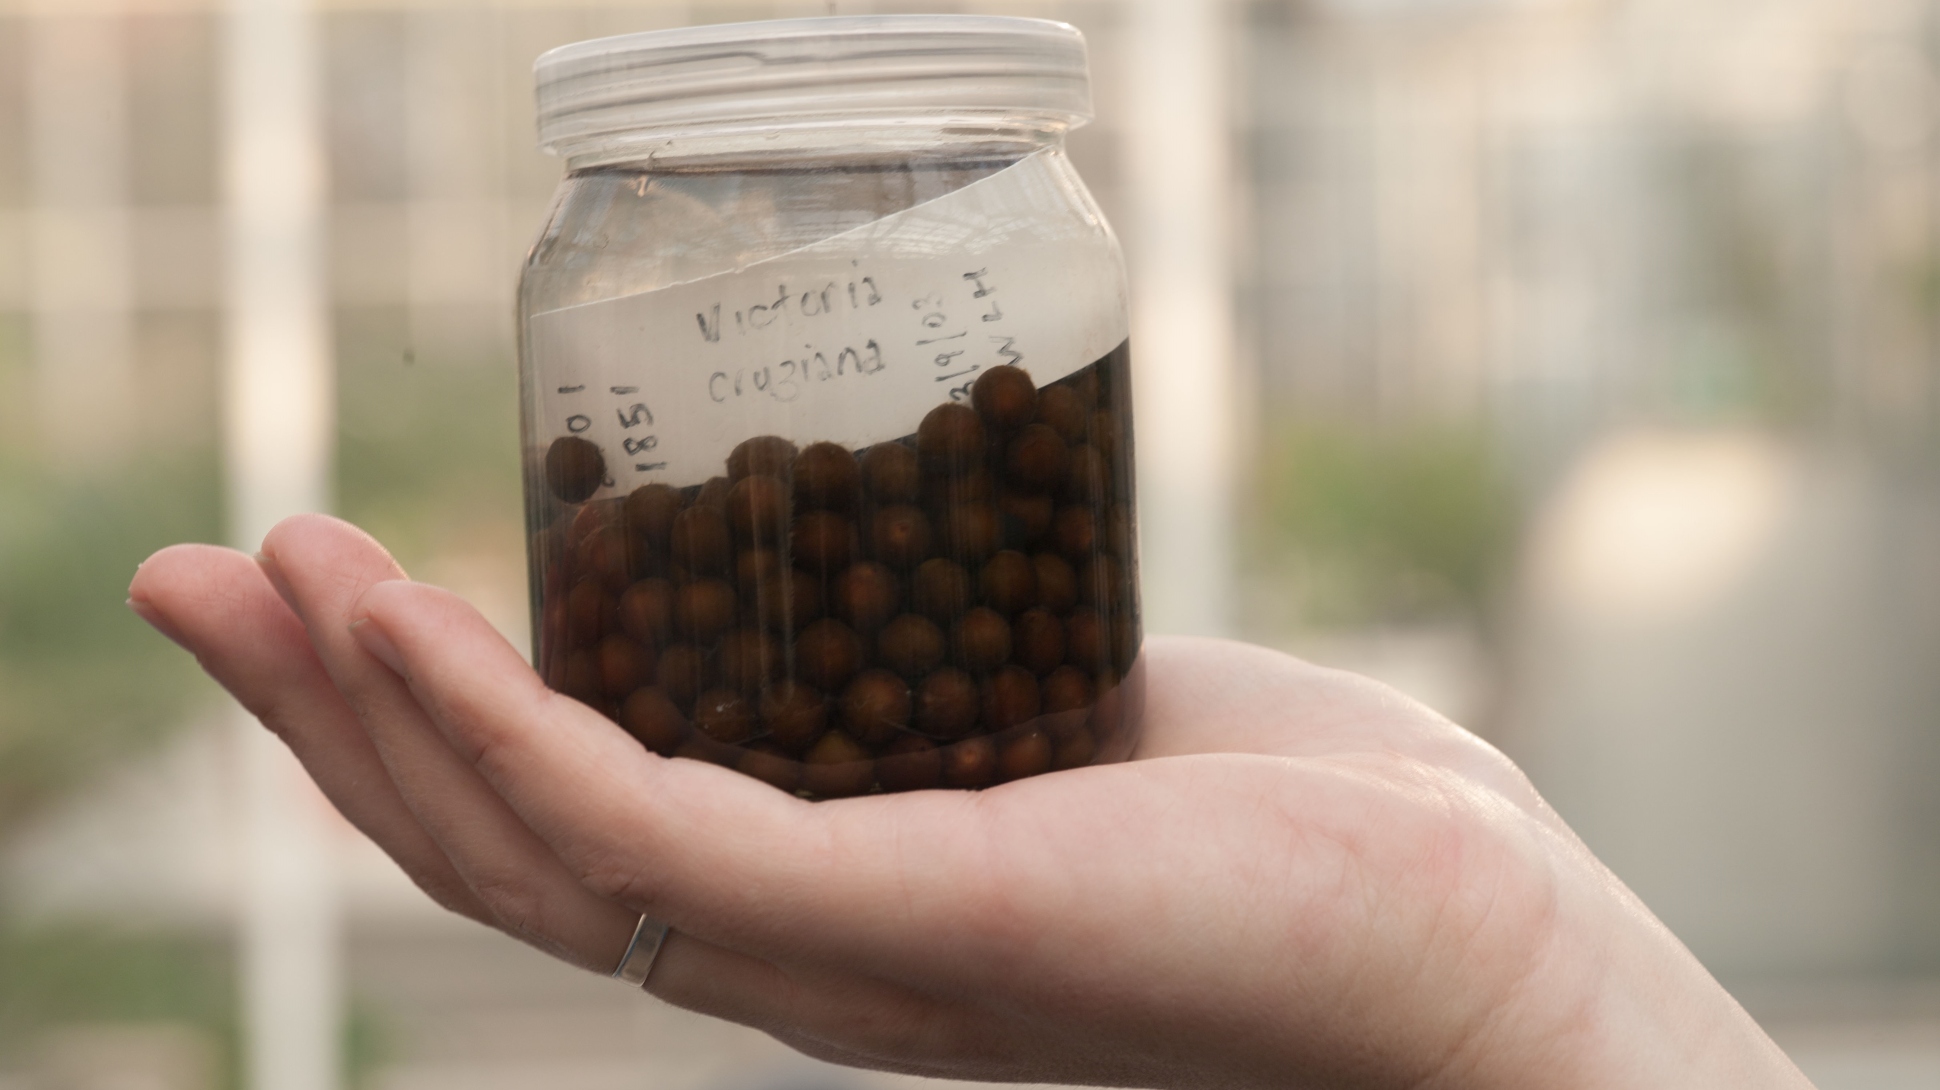 Large brown spherical Victoria cruziana seeds in a jar of liquid being held by a white hand